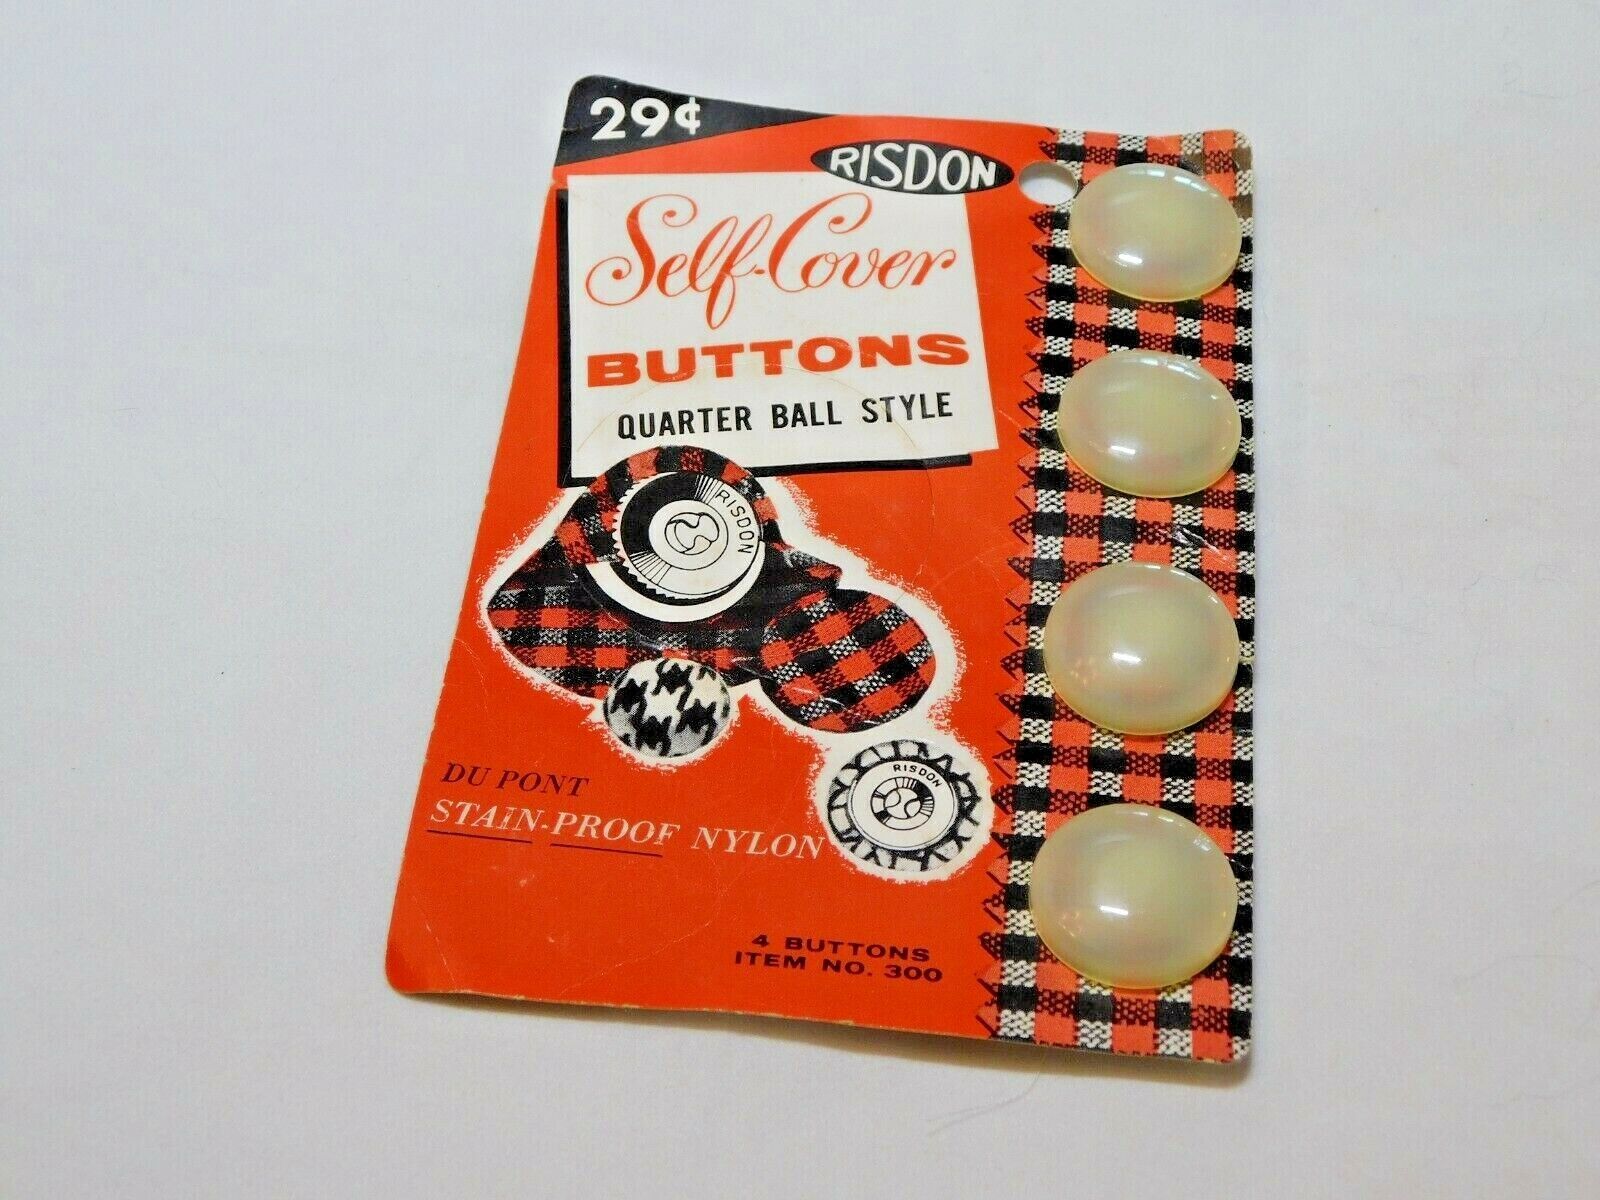 Sewing Notions Self-cover Buttons Button Hole Size 1-1/8" Cover 4 Buttons